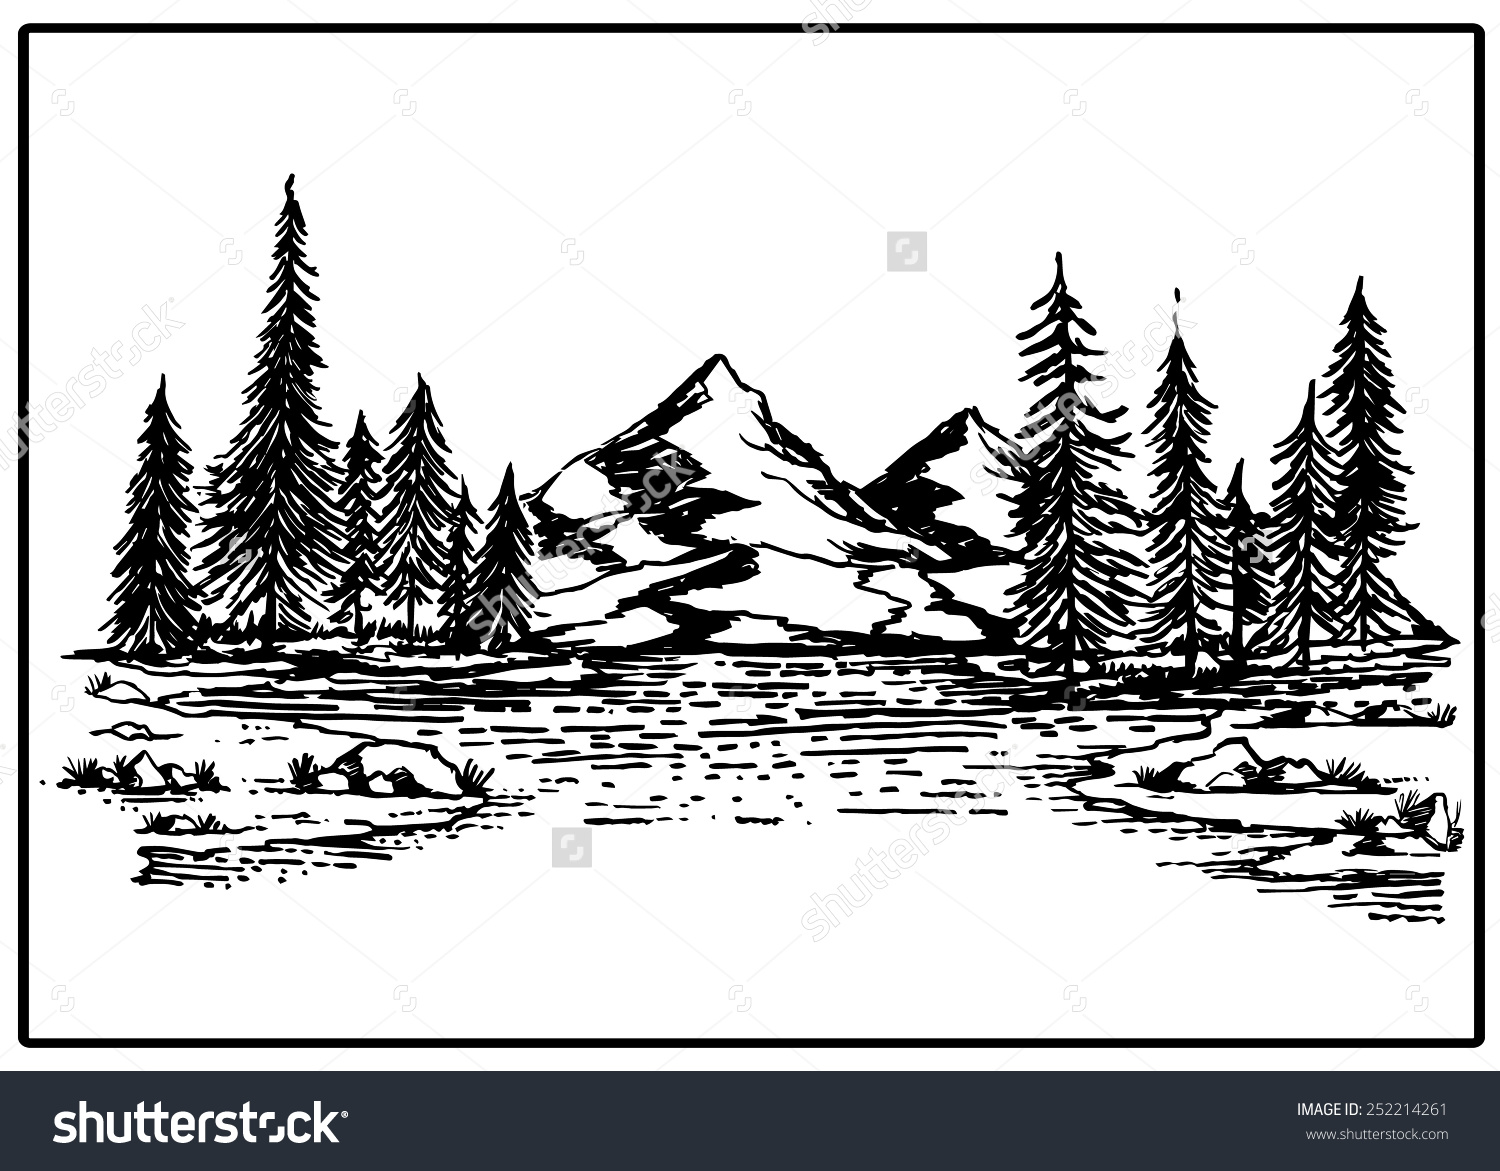 Box lake clipart 20 free Cliparts | Download images on ...